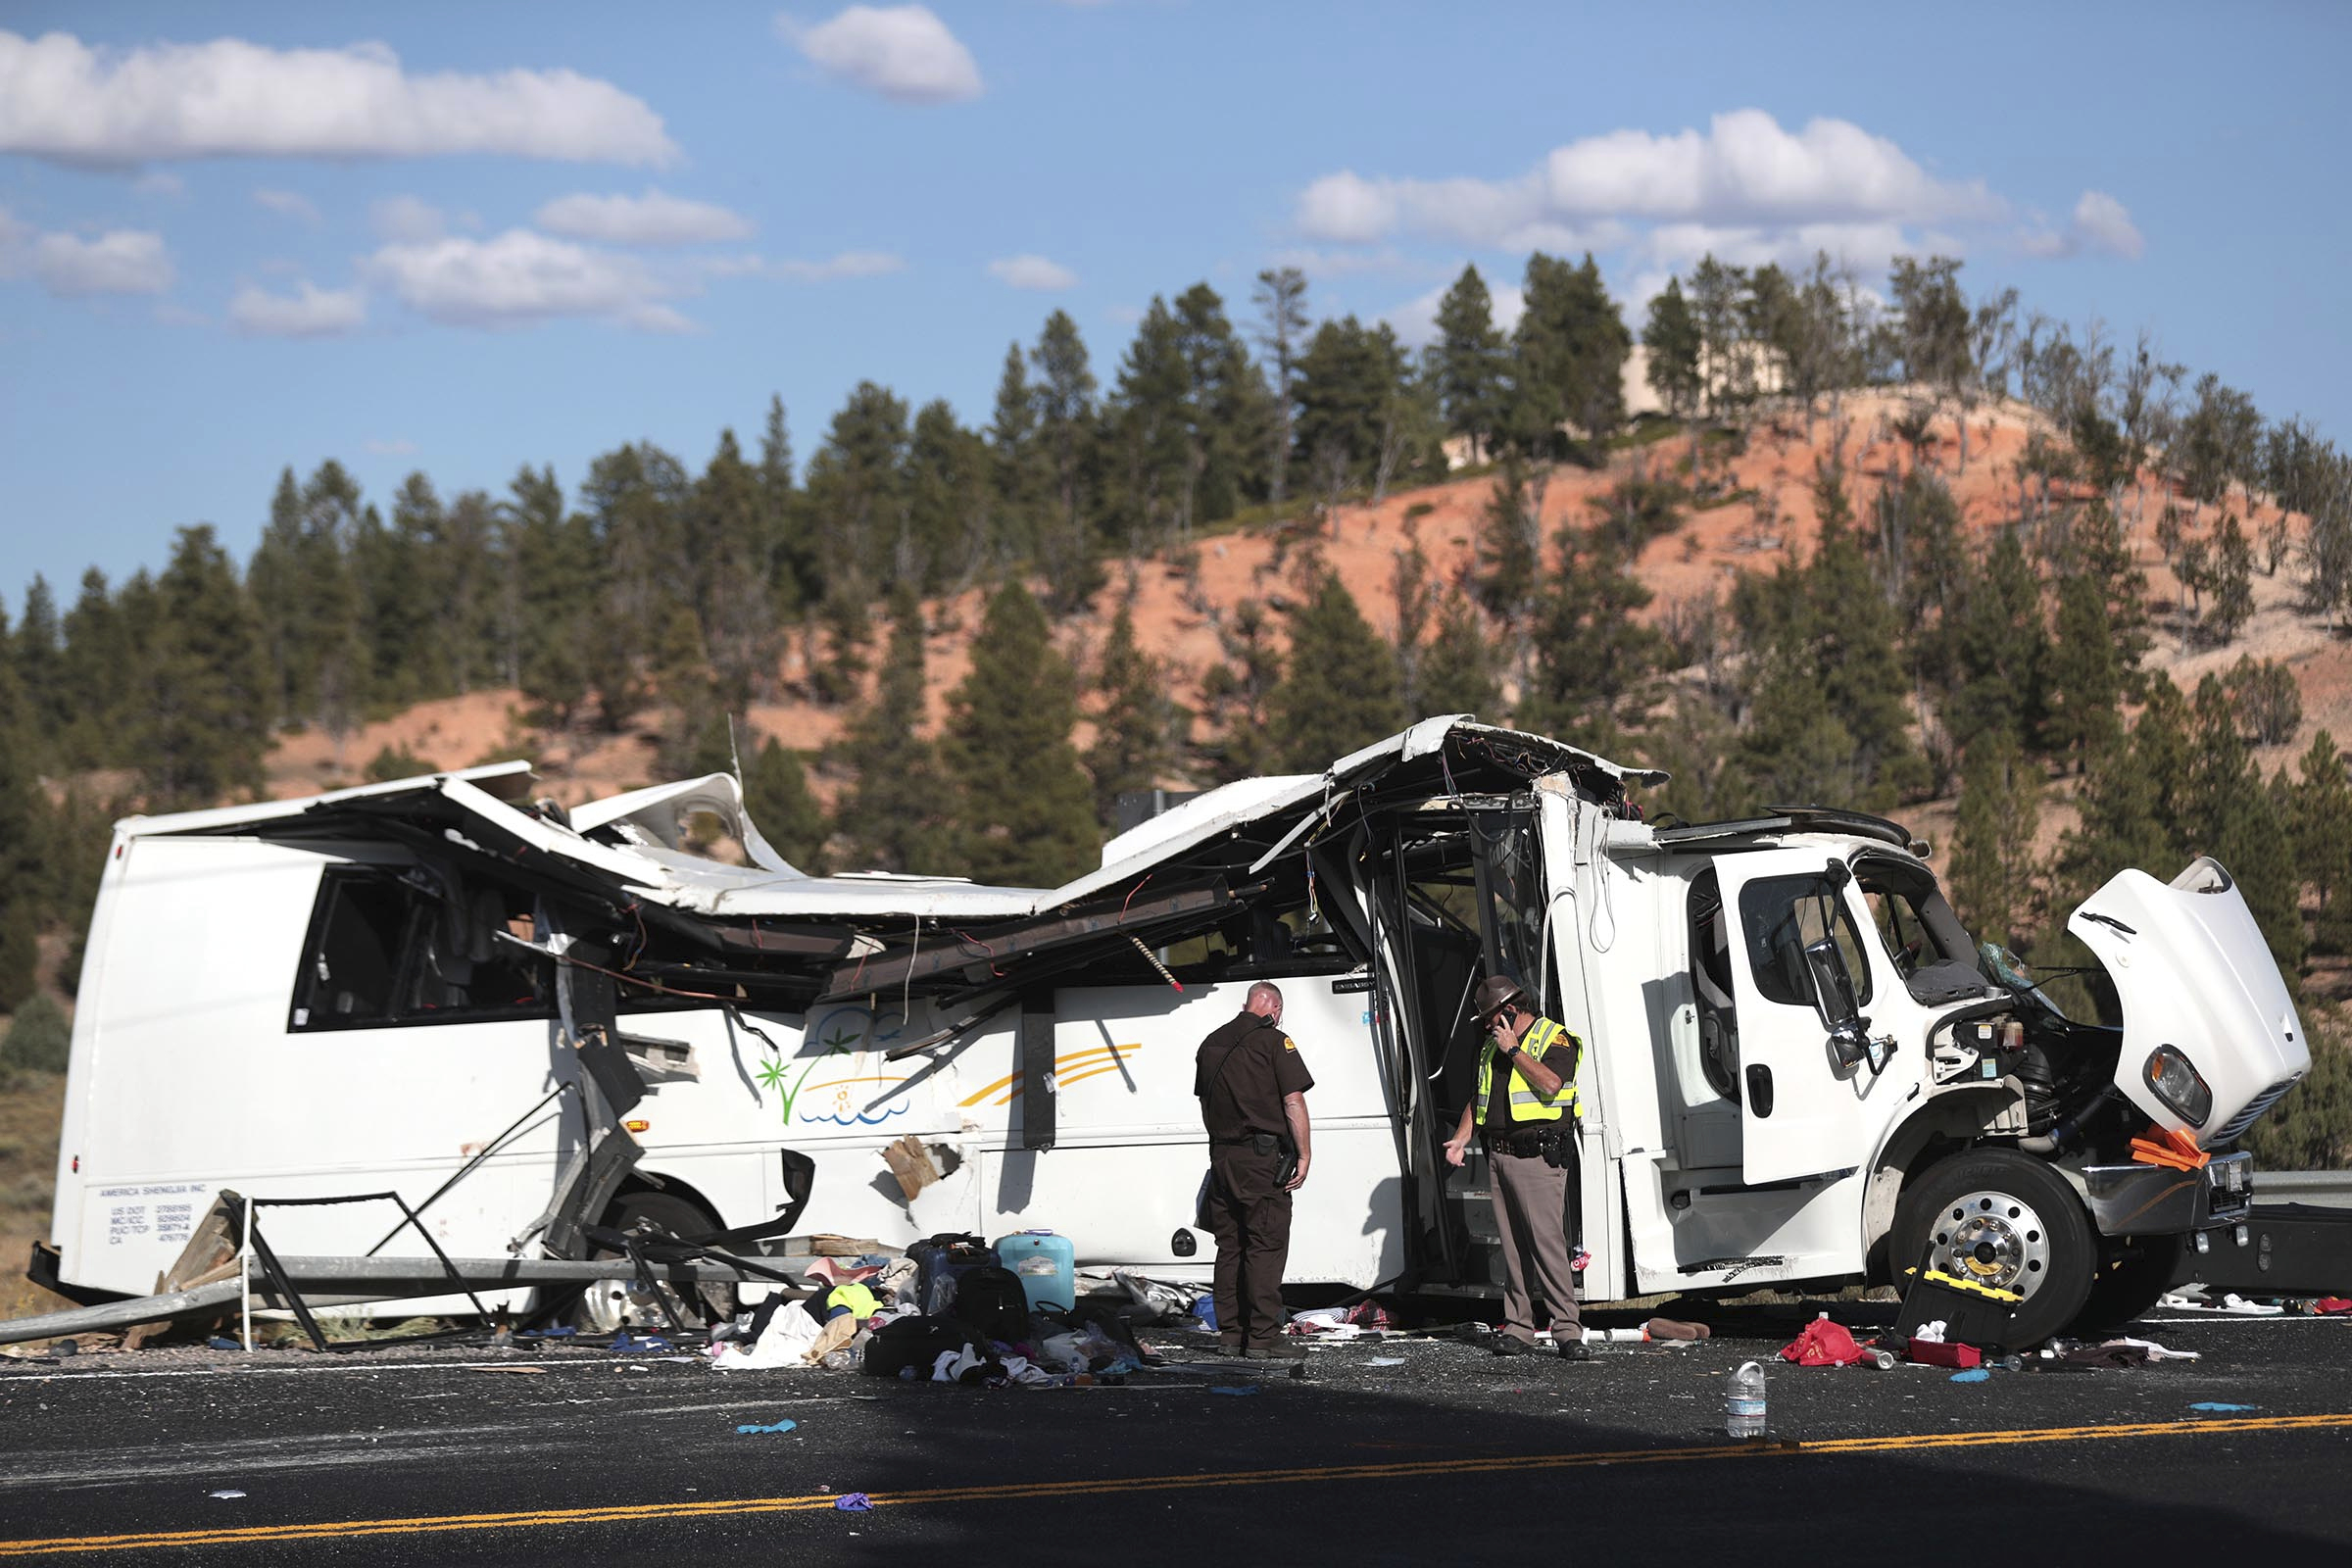 Authorities work the scene where at least four people were killed in a tour bus crash near Bryce Canyon National Park, Friday, Sept. 20, 2019, in Utah. (Spenser Heaps/The Deseret News via AP)